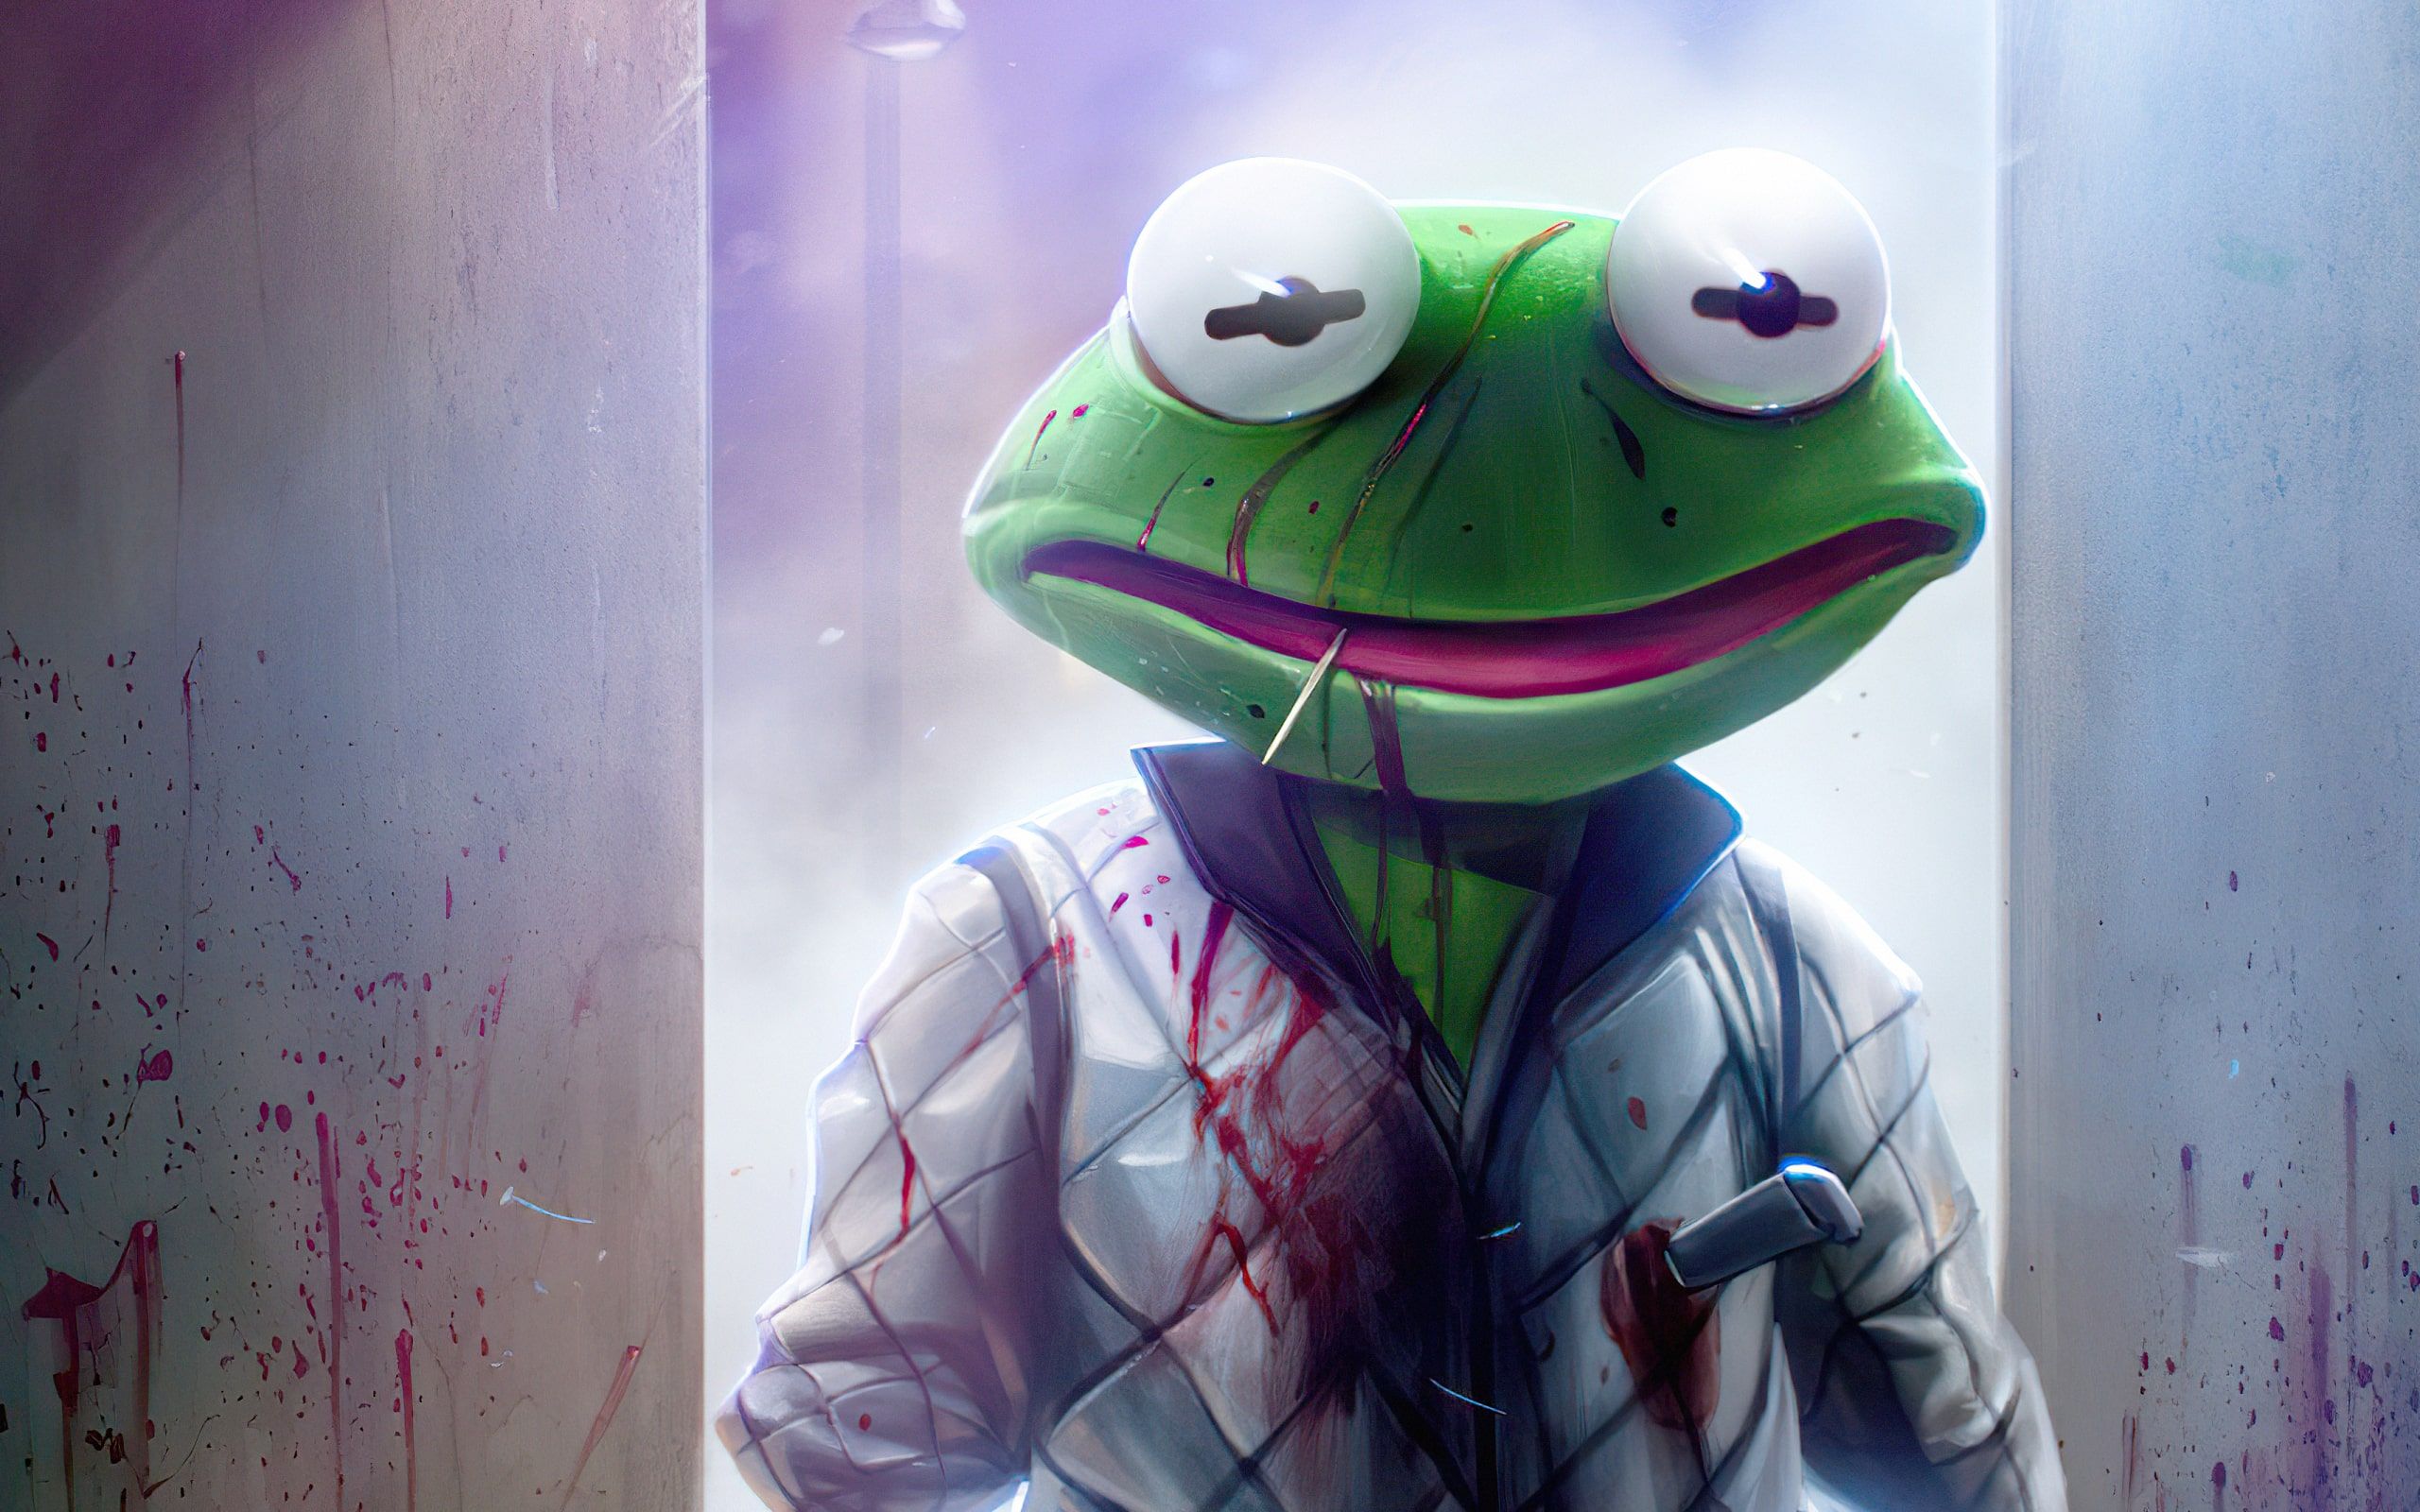 Wallpaper of Drive, Movie, Frog Kermit the Frog background & HD image